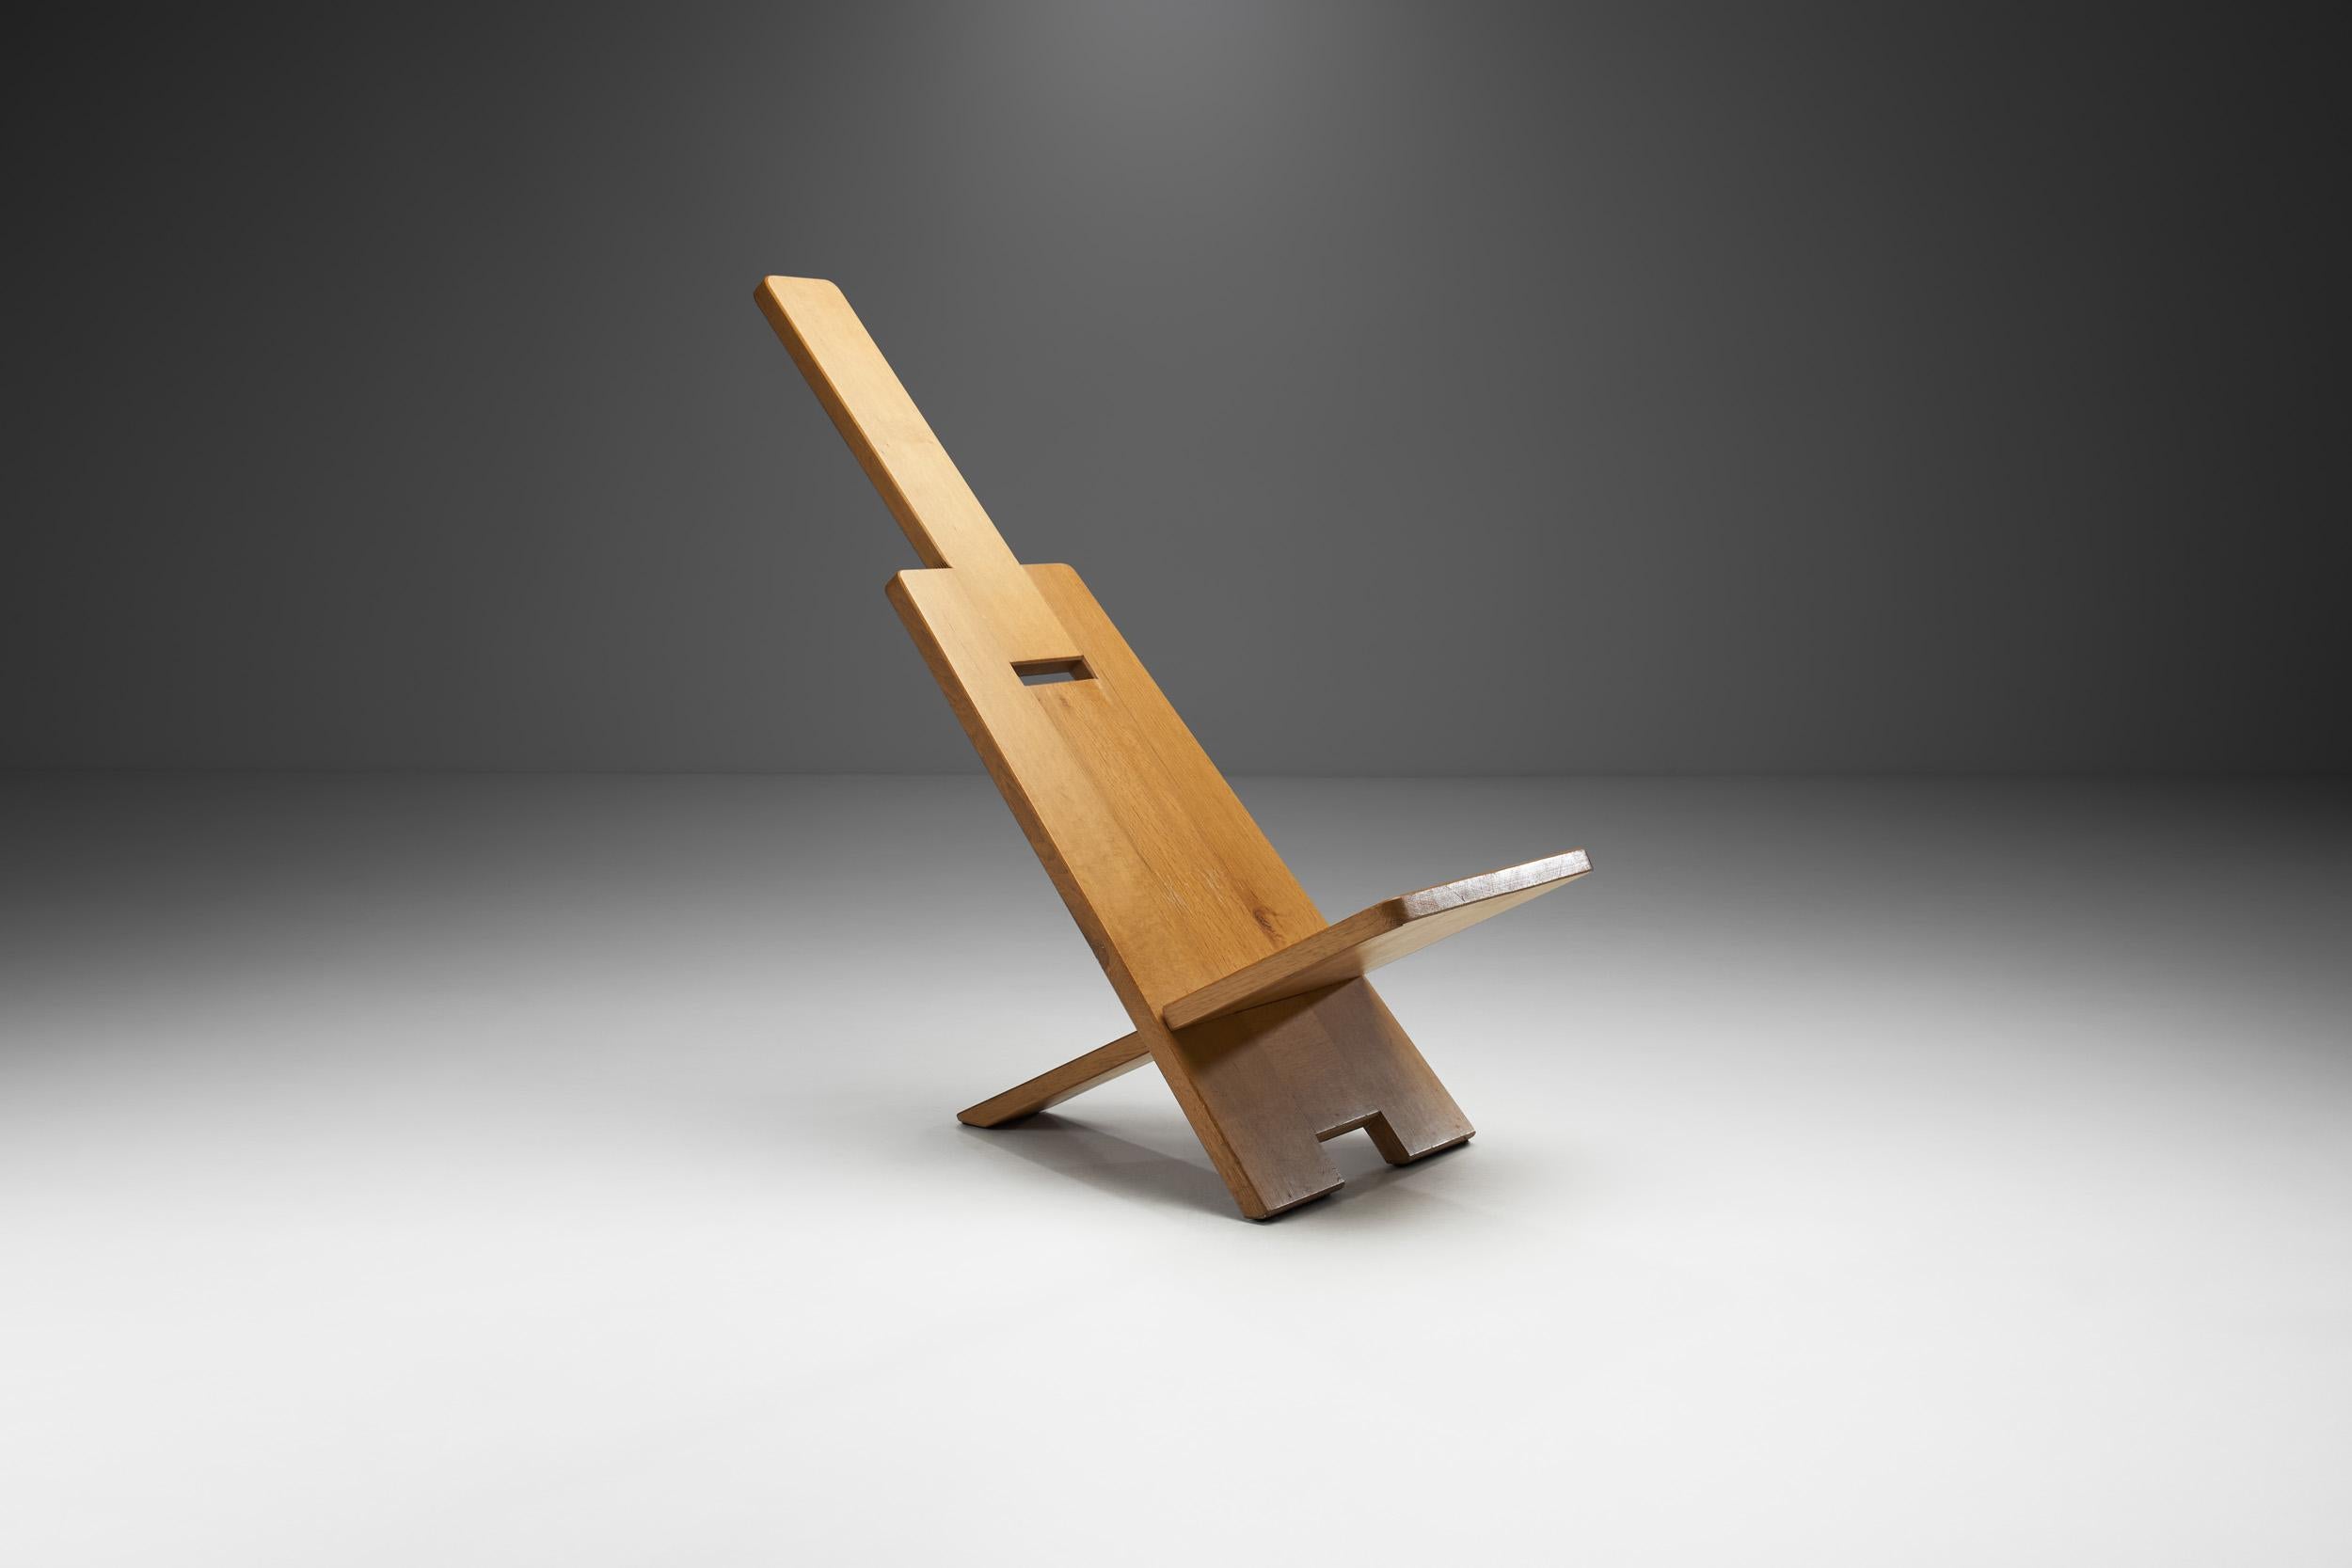 This sculptural chair by French designer, Alain Gaubert is an eye-catching nod to minimalist design. The construction is as ingeniously simple as it is visually striking.

The chair is made of solid oak, and each was crafted using just two planes